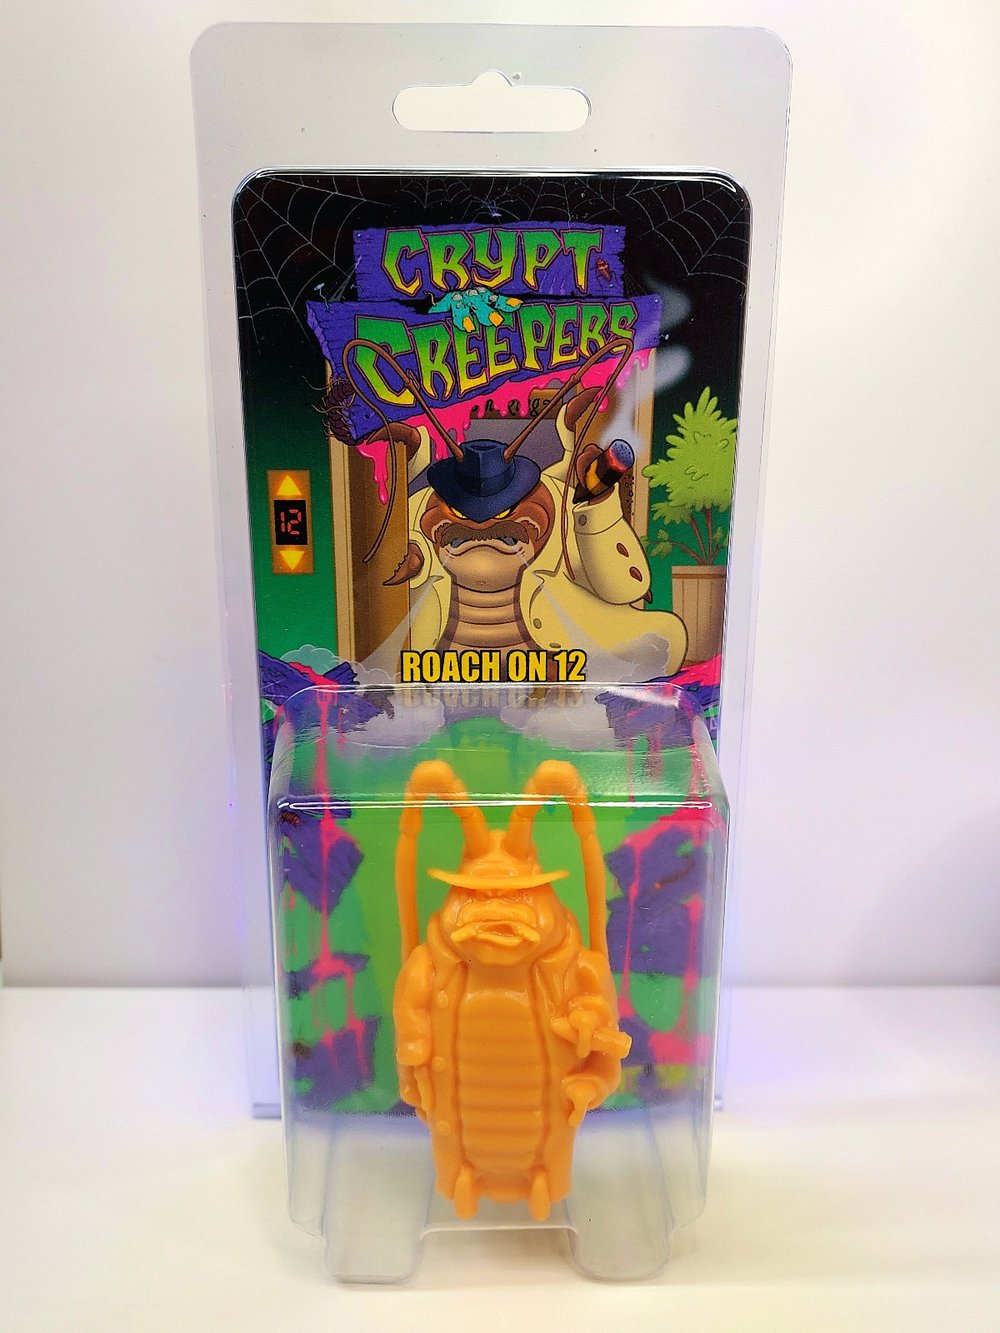 Crypt Creepers Roach on 12